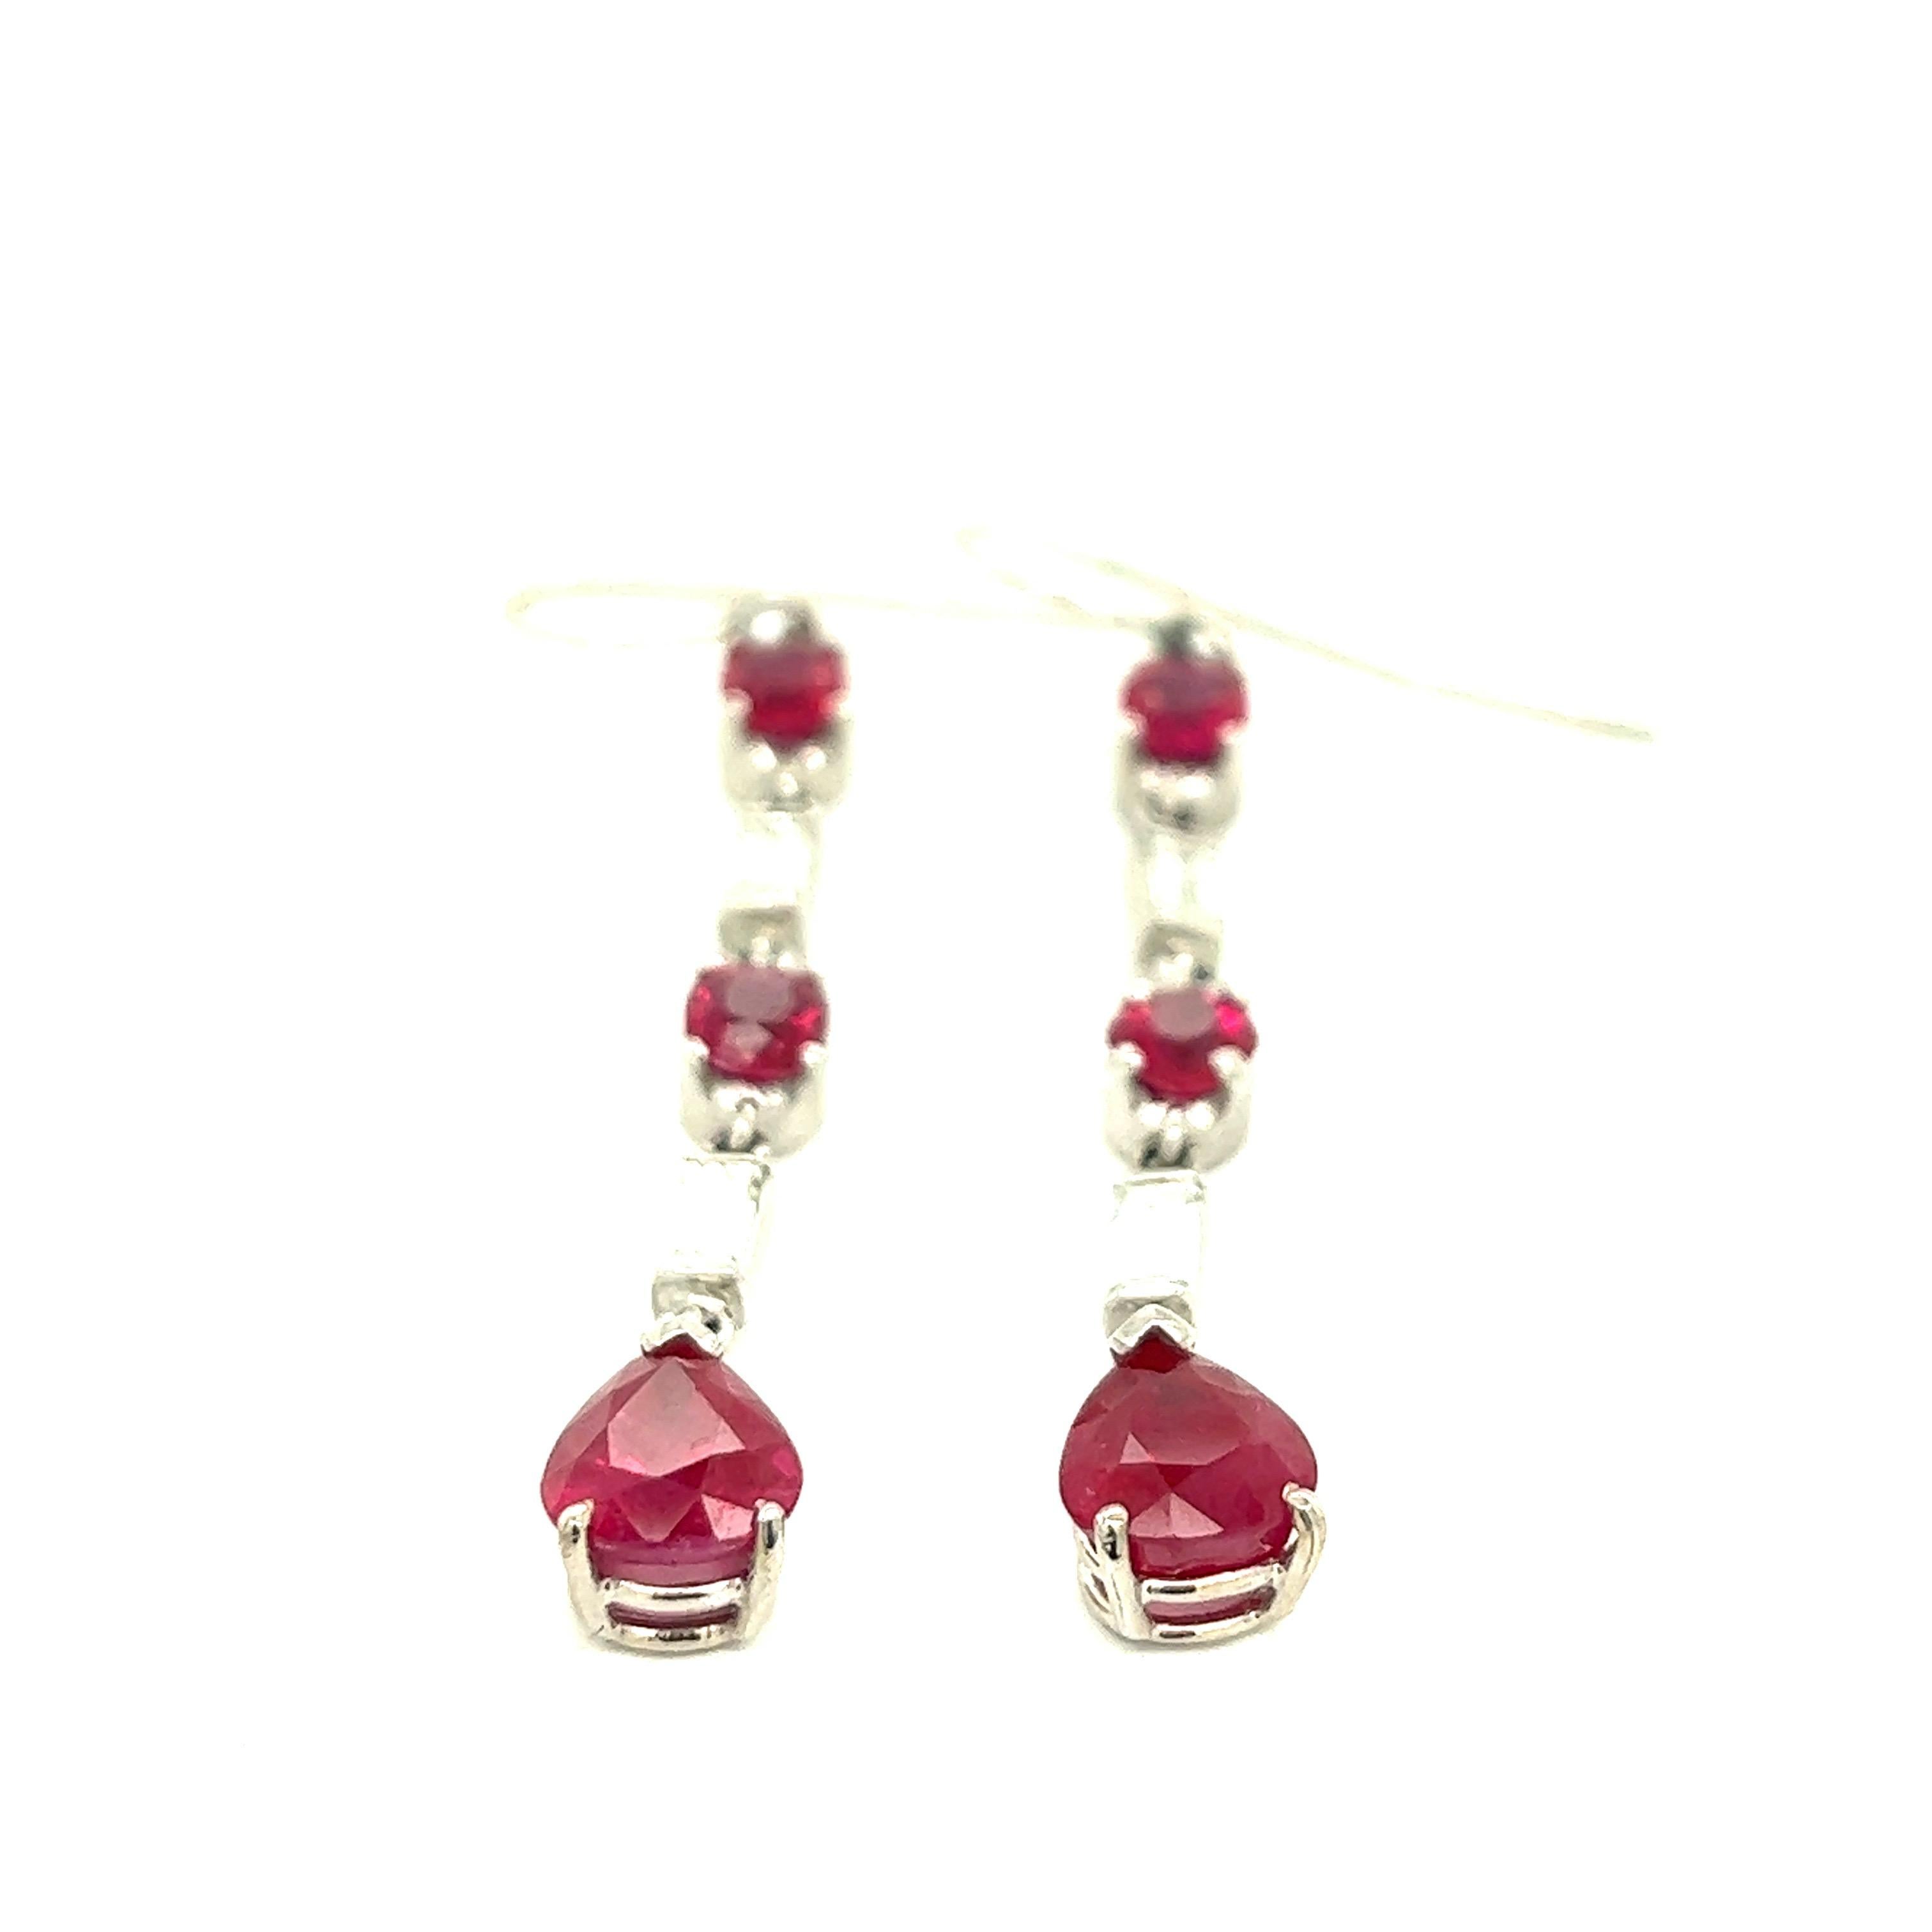 Ruby from Burma,Diamond Platinum Dangling Hook Earrings 

Pear-shape (6.9 x 8 mm) and round-cut rubies of approximately 4 carats total, baguette diamonds of approximately 0.80 carat total, set on platinum metal; fish hooks style

Size: length 5.1